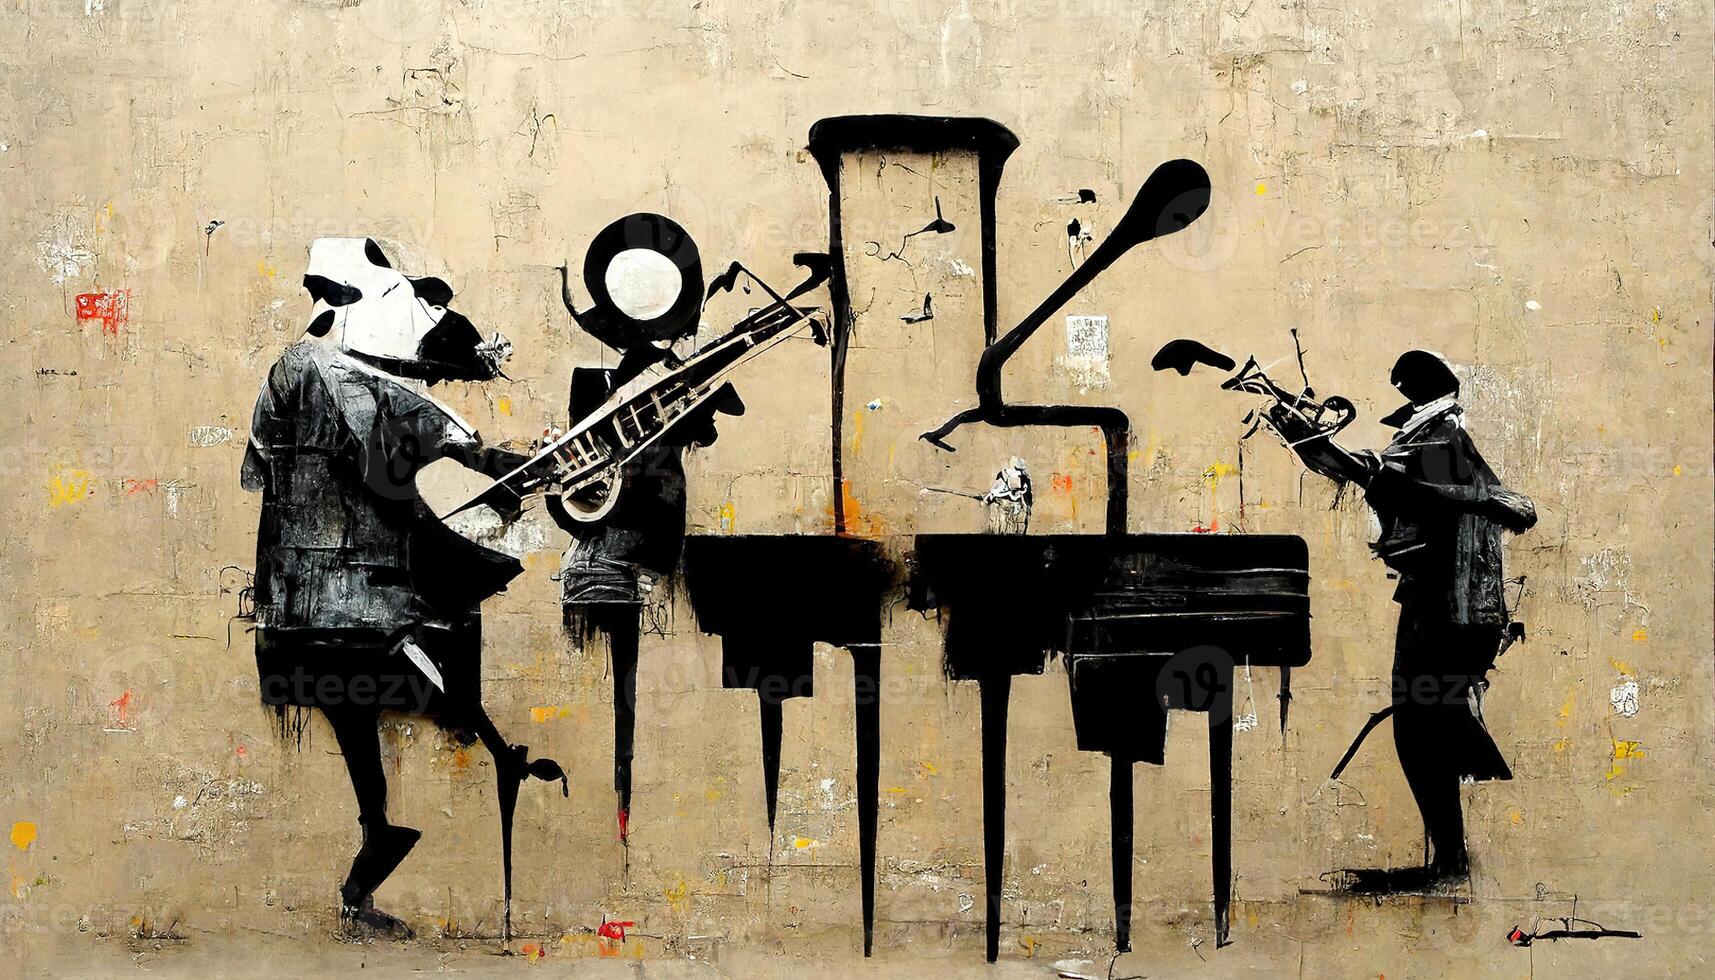 , Street art with keys and musical instruments silhouettes. Ink graffiti art on a textured paper vintage background, inspired by Banksy photo